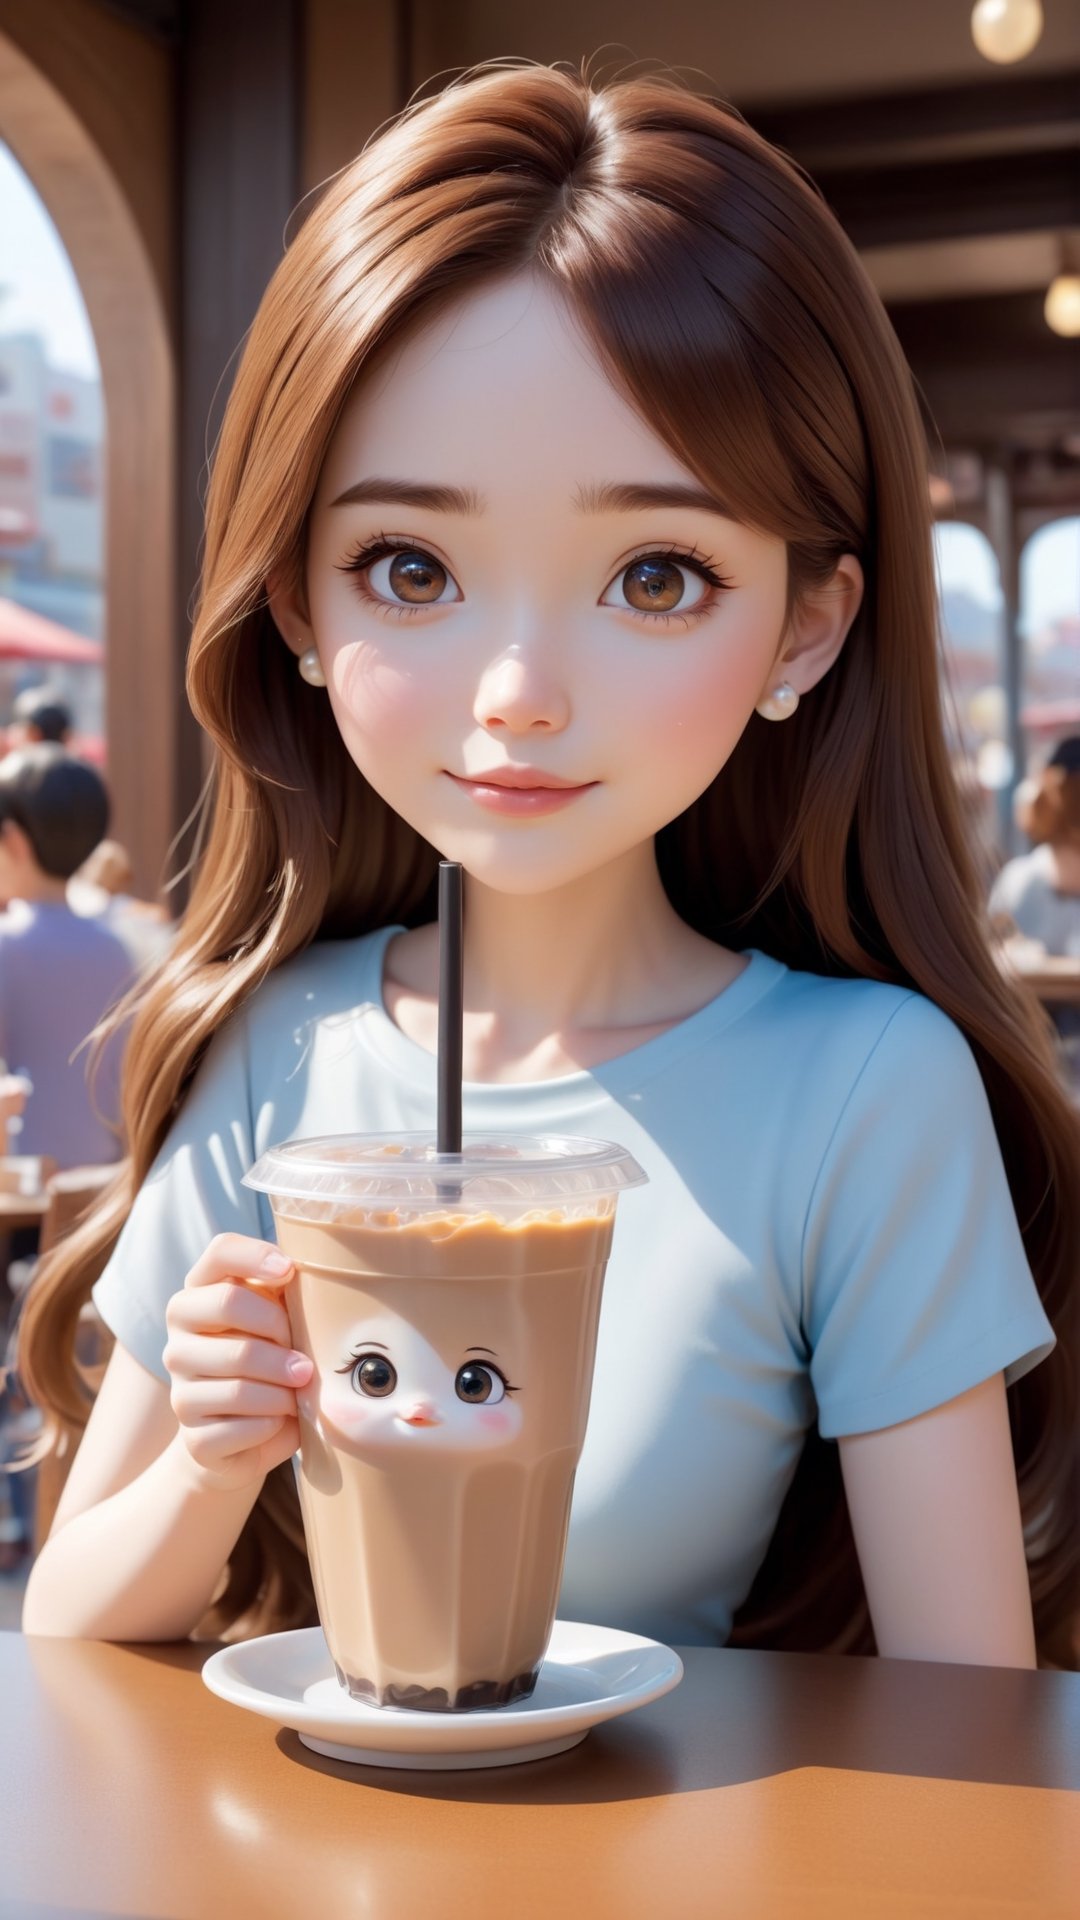 Pixar anime movie scene style, Disney anime scene style, an anime girl drinking Pearl milk tea at a table, in the style of realistic images, childlike, realistic lifelike figures, he Jiaying, white and brown, cute and colorful, shiny/glossy, Realistic photograph, high quality, portrait photograph